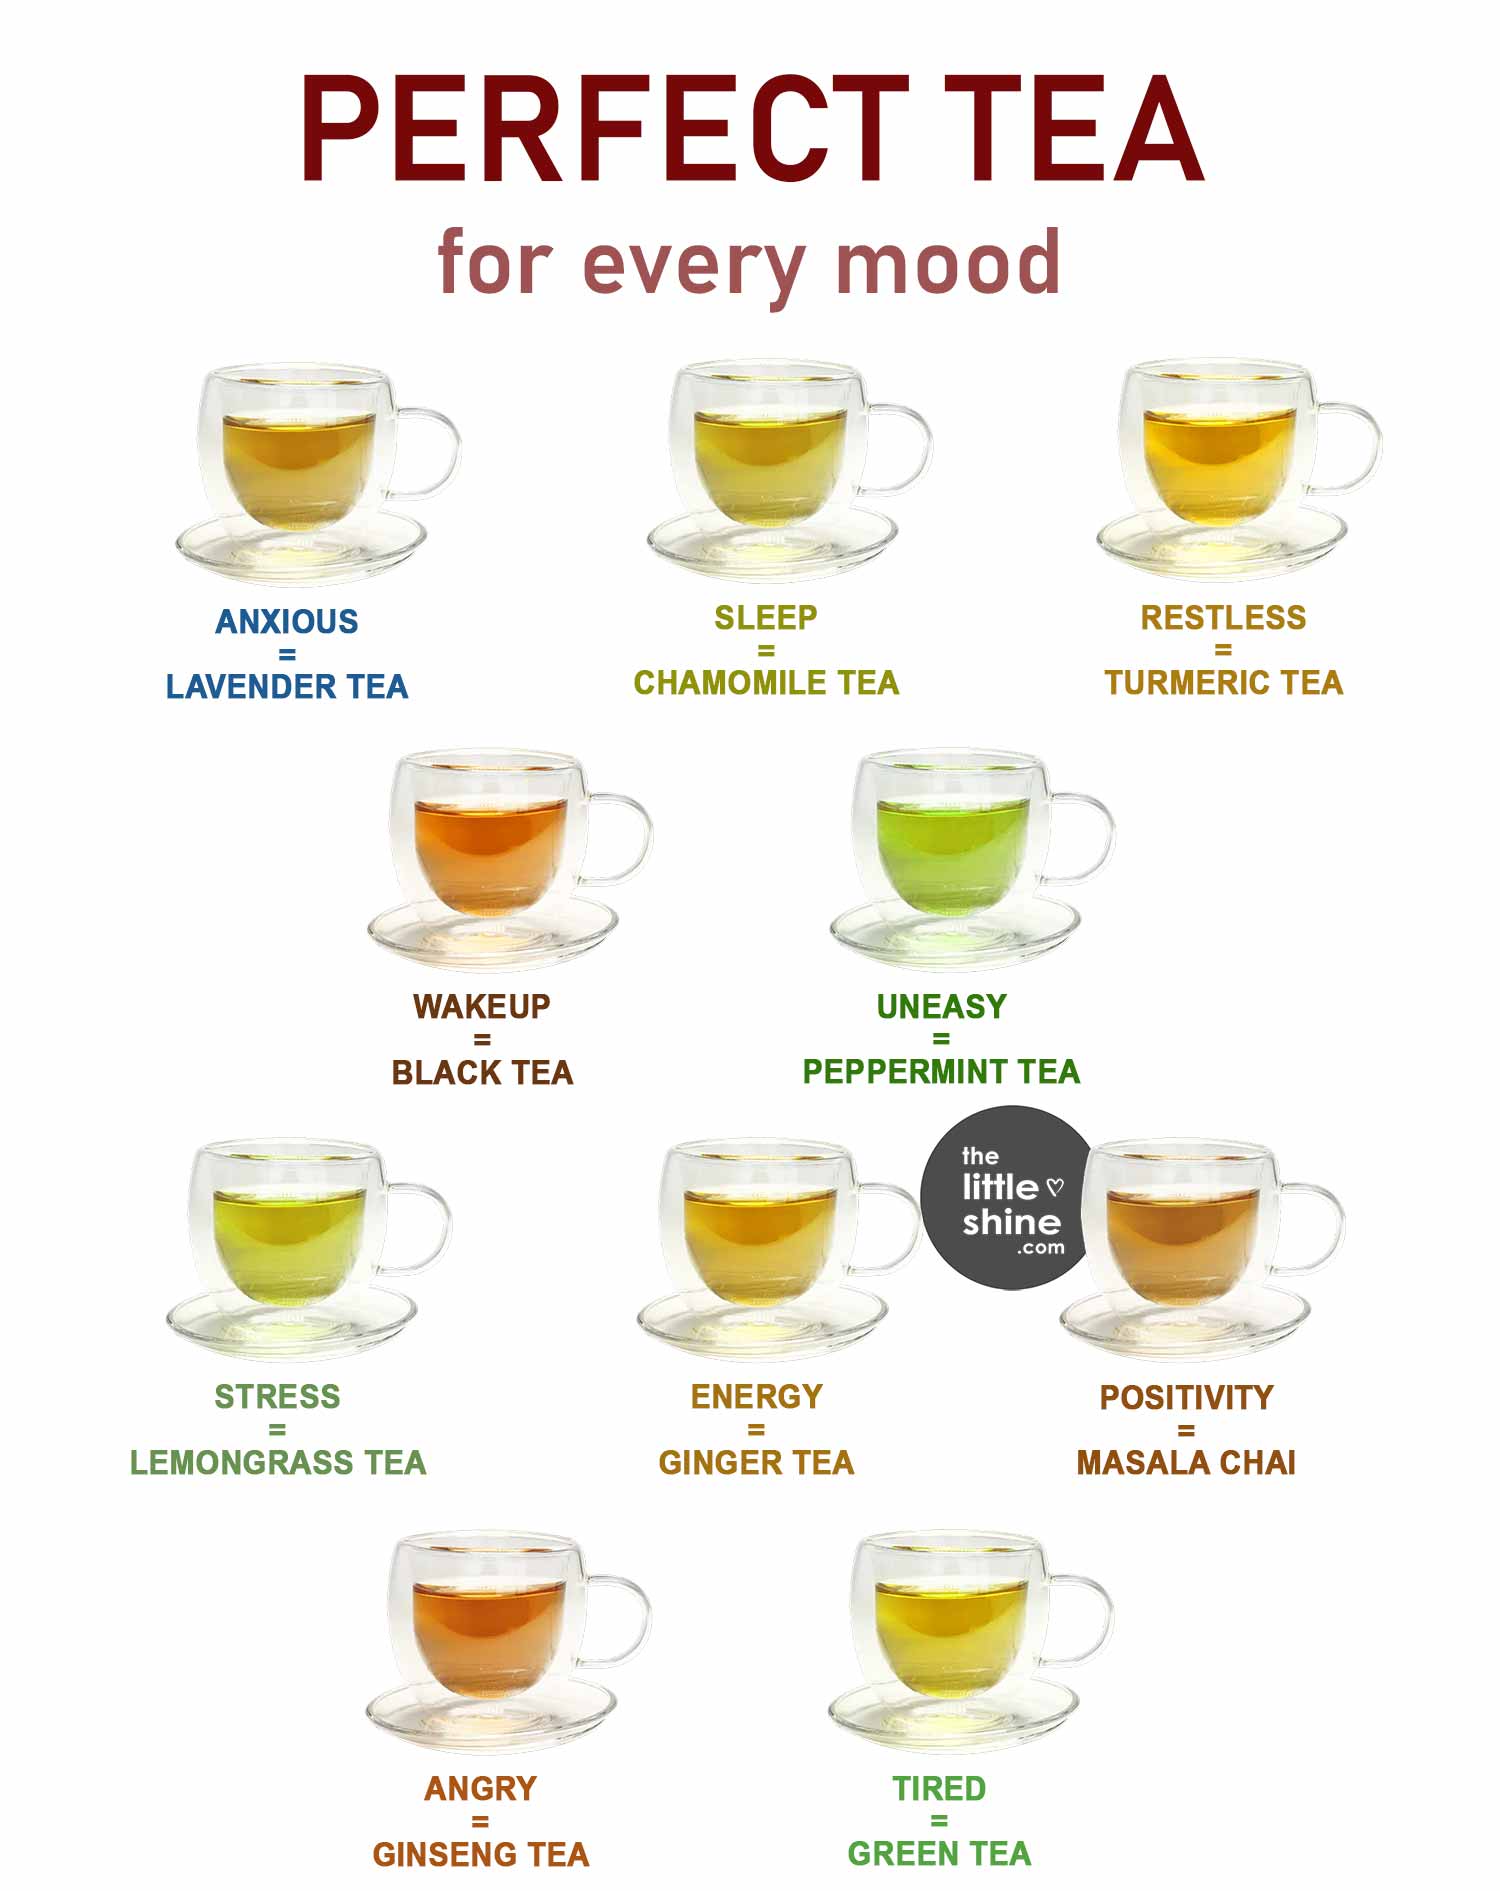 A perfect cup of tea for every mood